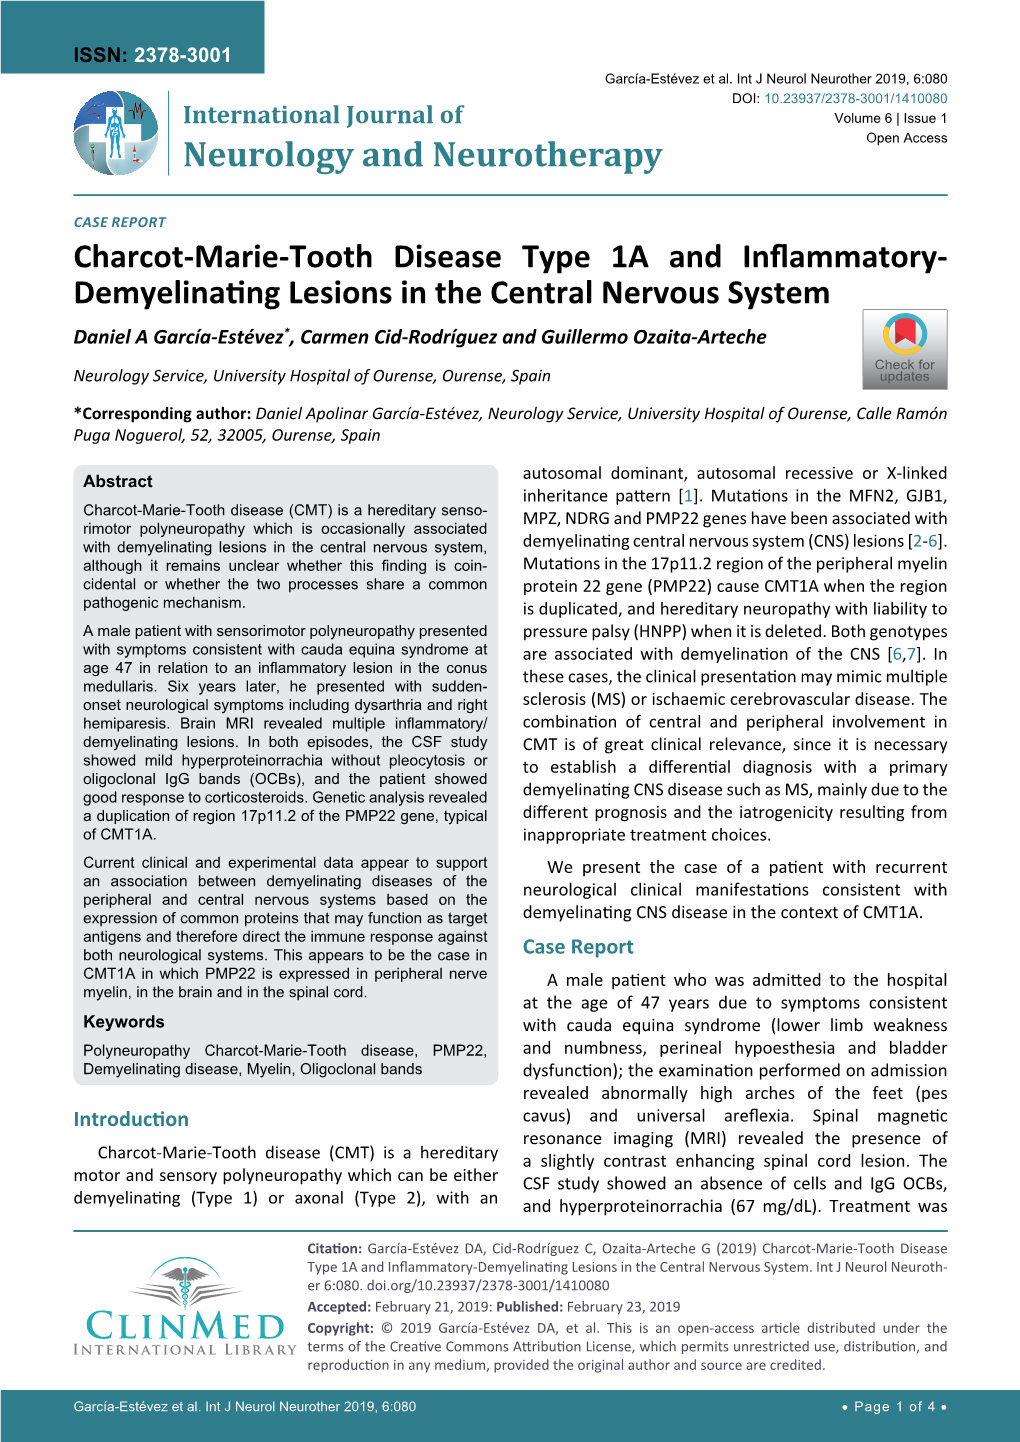 Charcot-Marie-Tooth Disease Type 1A and Inflammatory-Demyelinating Lesions in the Central Nervous System